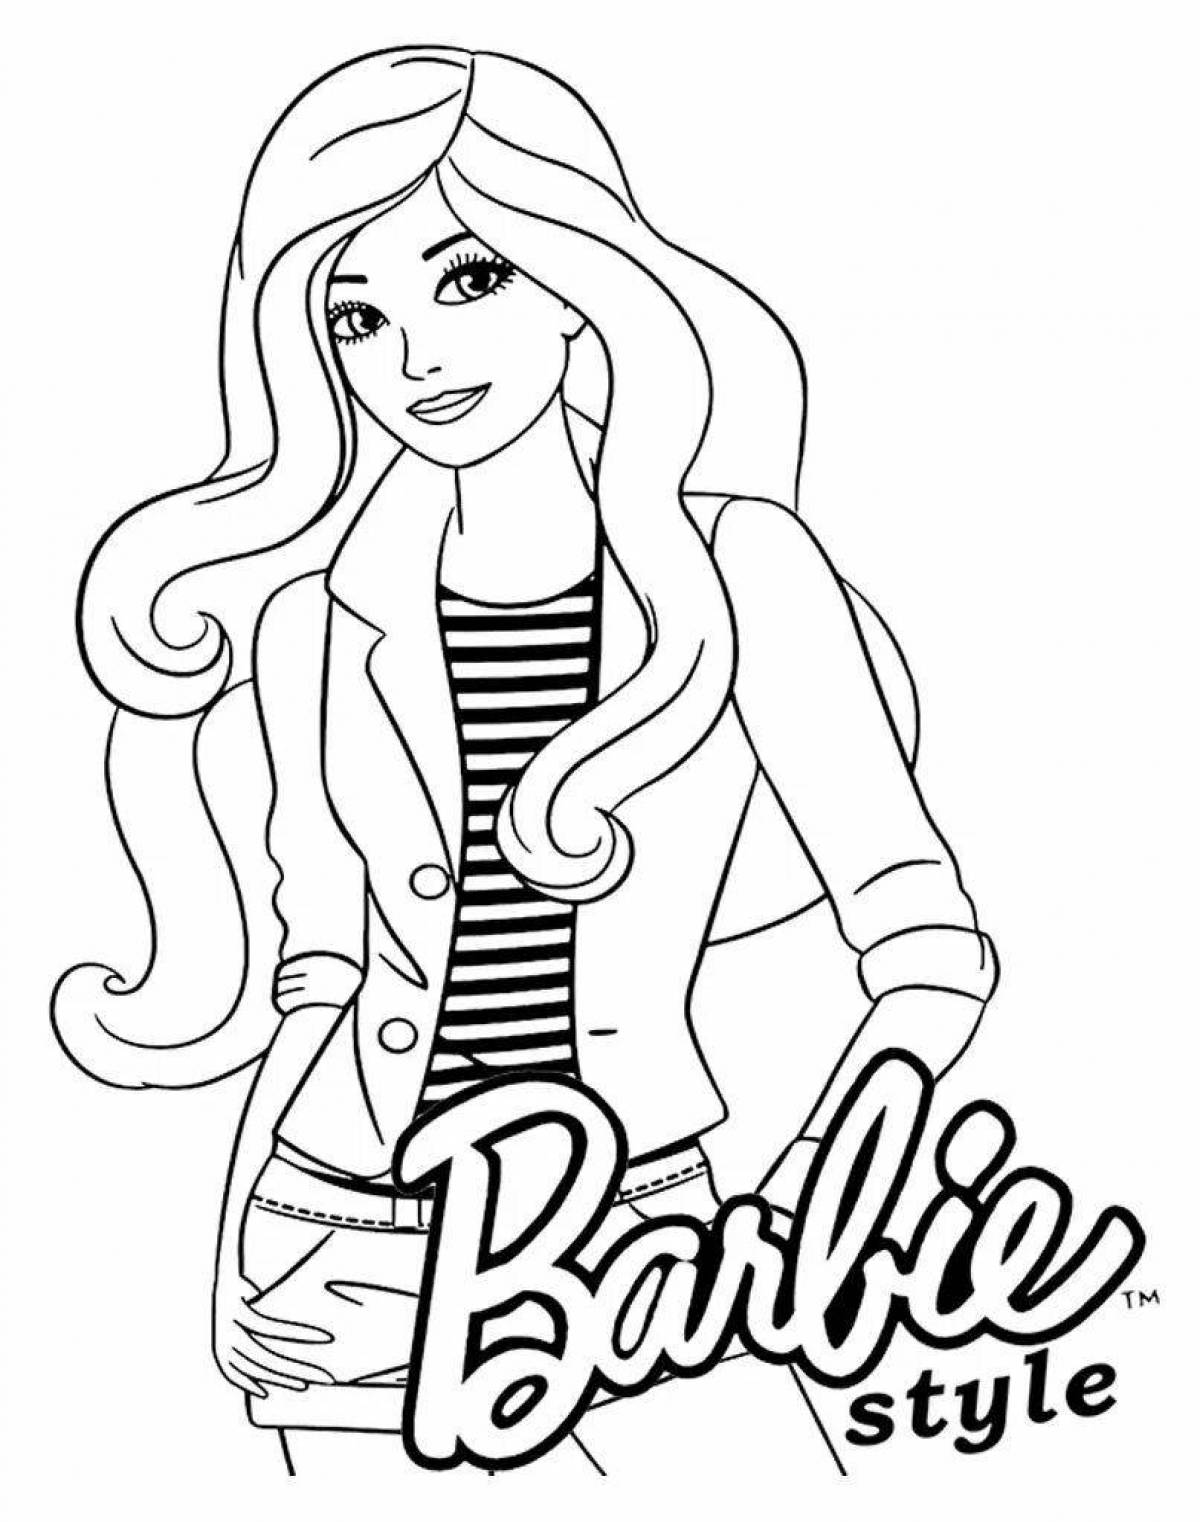 Radiant barbie coloring book for kids 6-7 years old